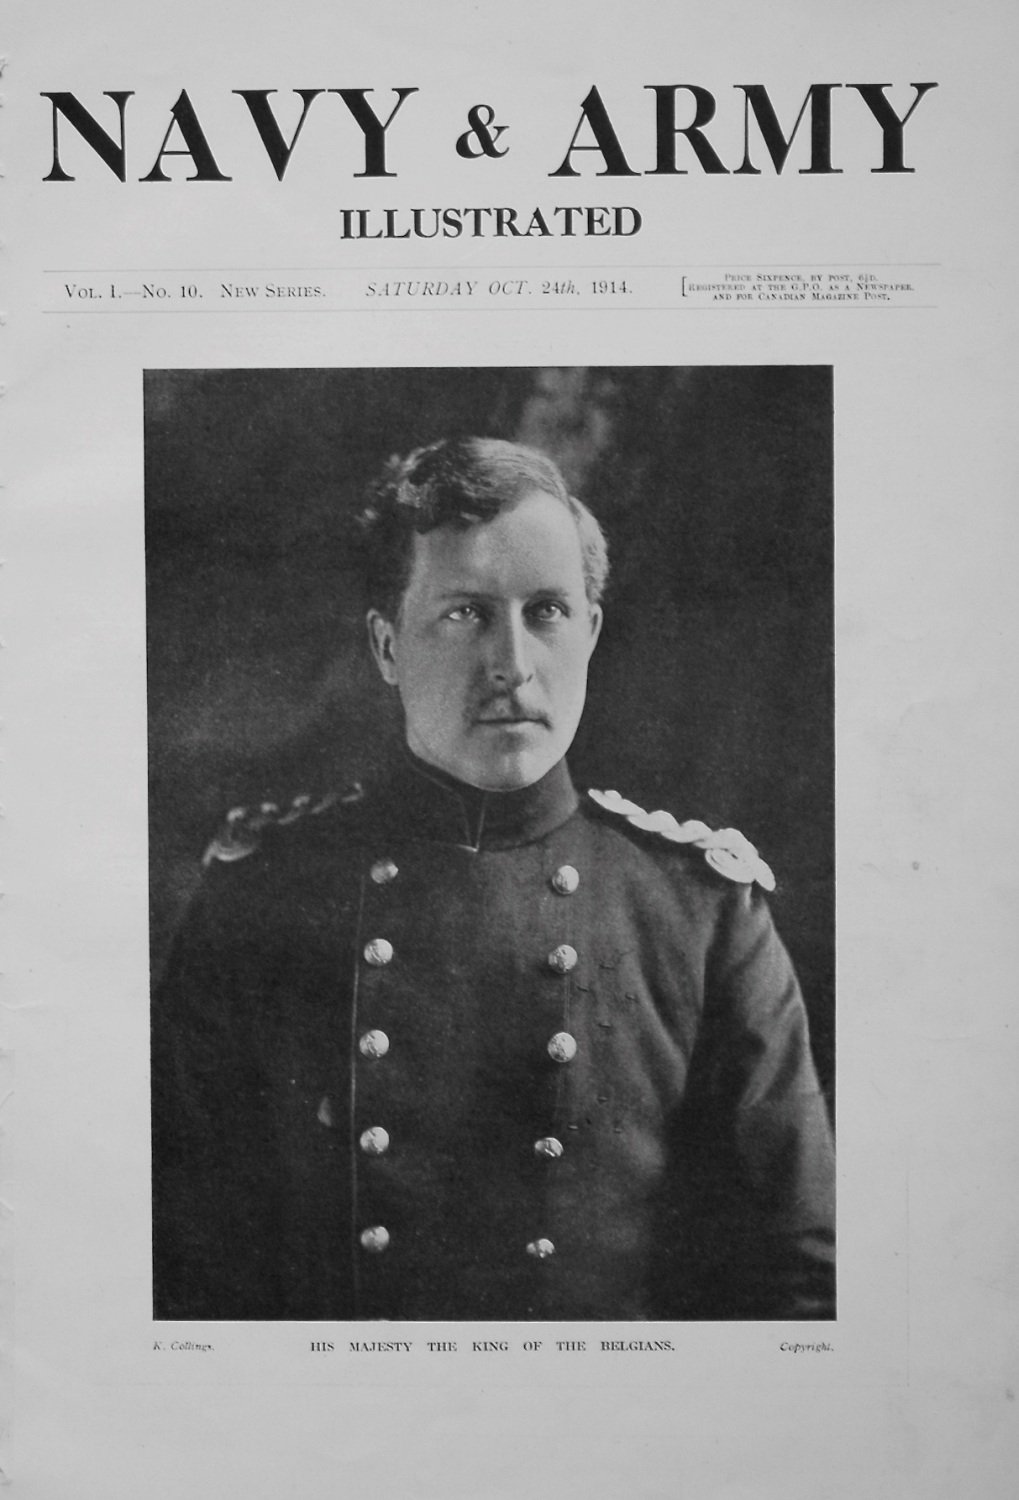 Navy & Army Illustrated. October 24th, 1914.